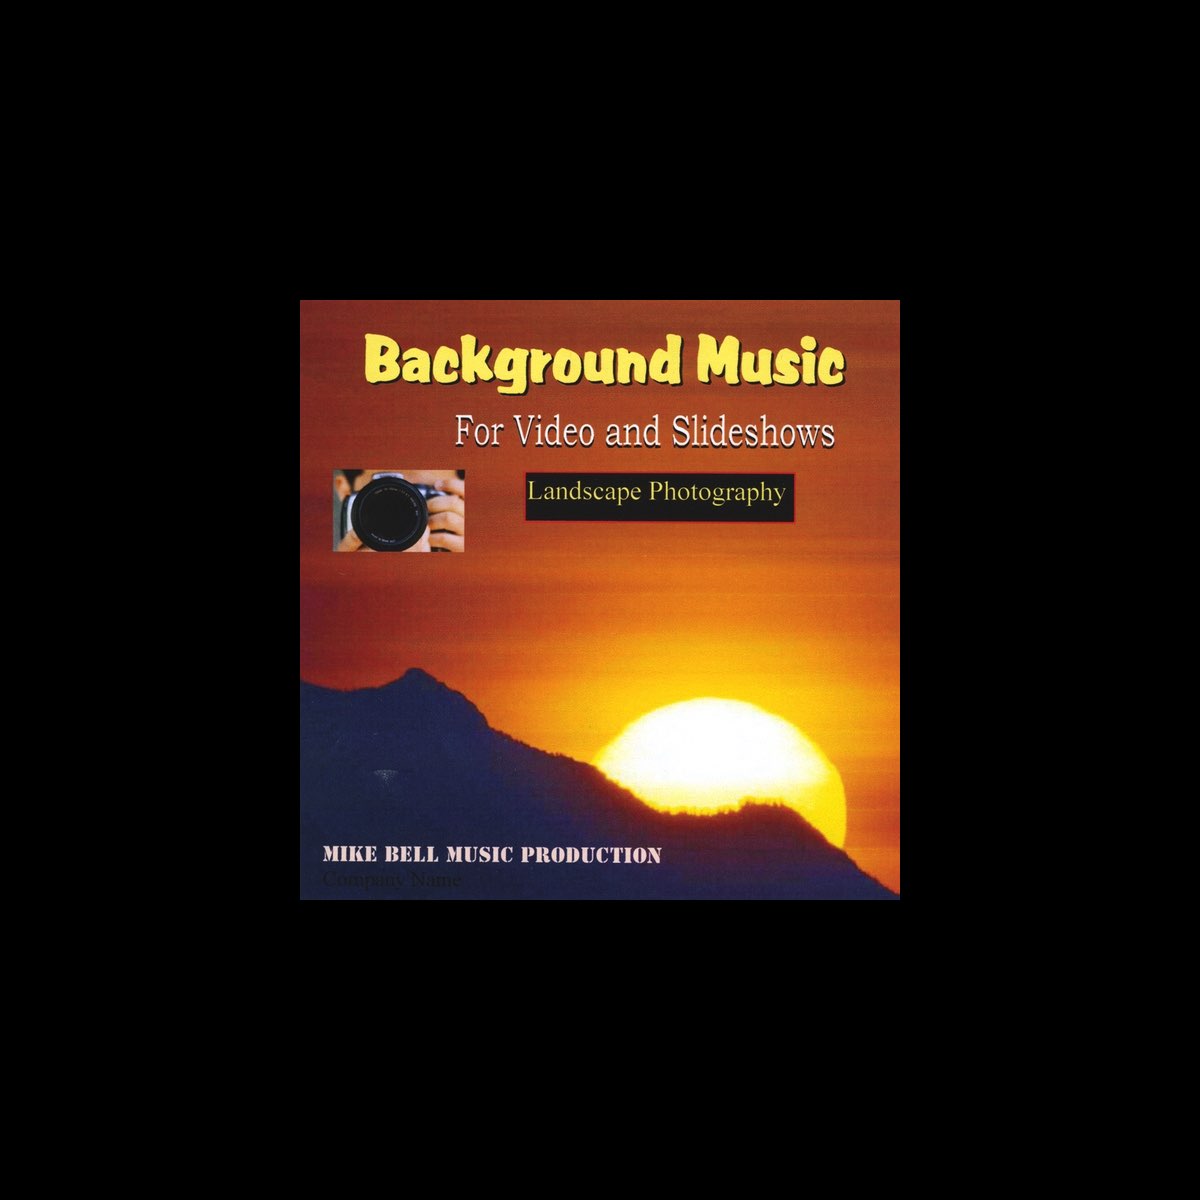 Background Music for Video and Slideshows (Landscape Photography) by Mike  Bell on Apple Music